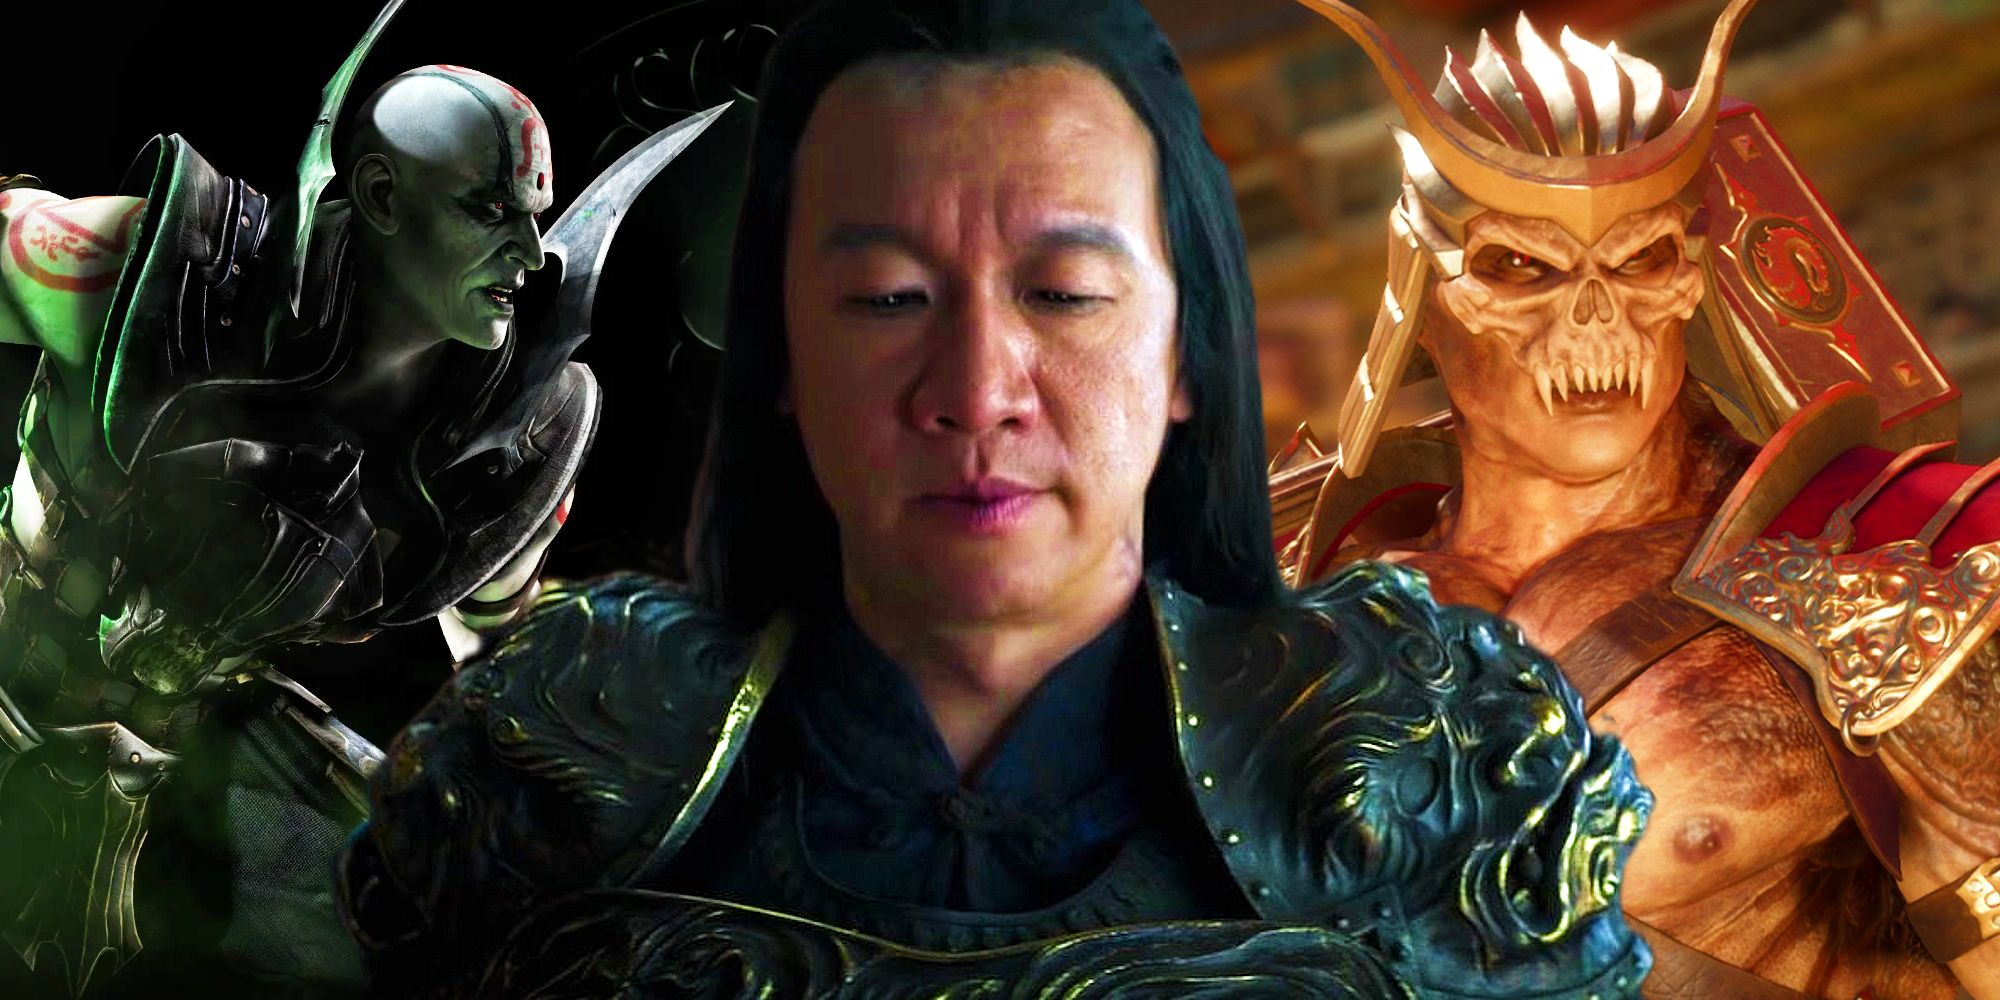 Mortal Kombat 2 Is Bringing Back Classic Villains, Starting With